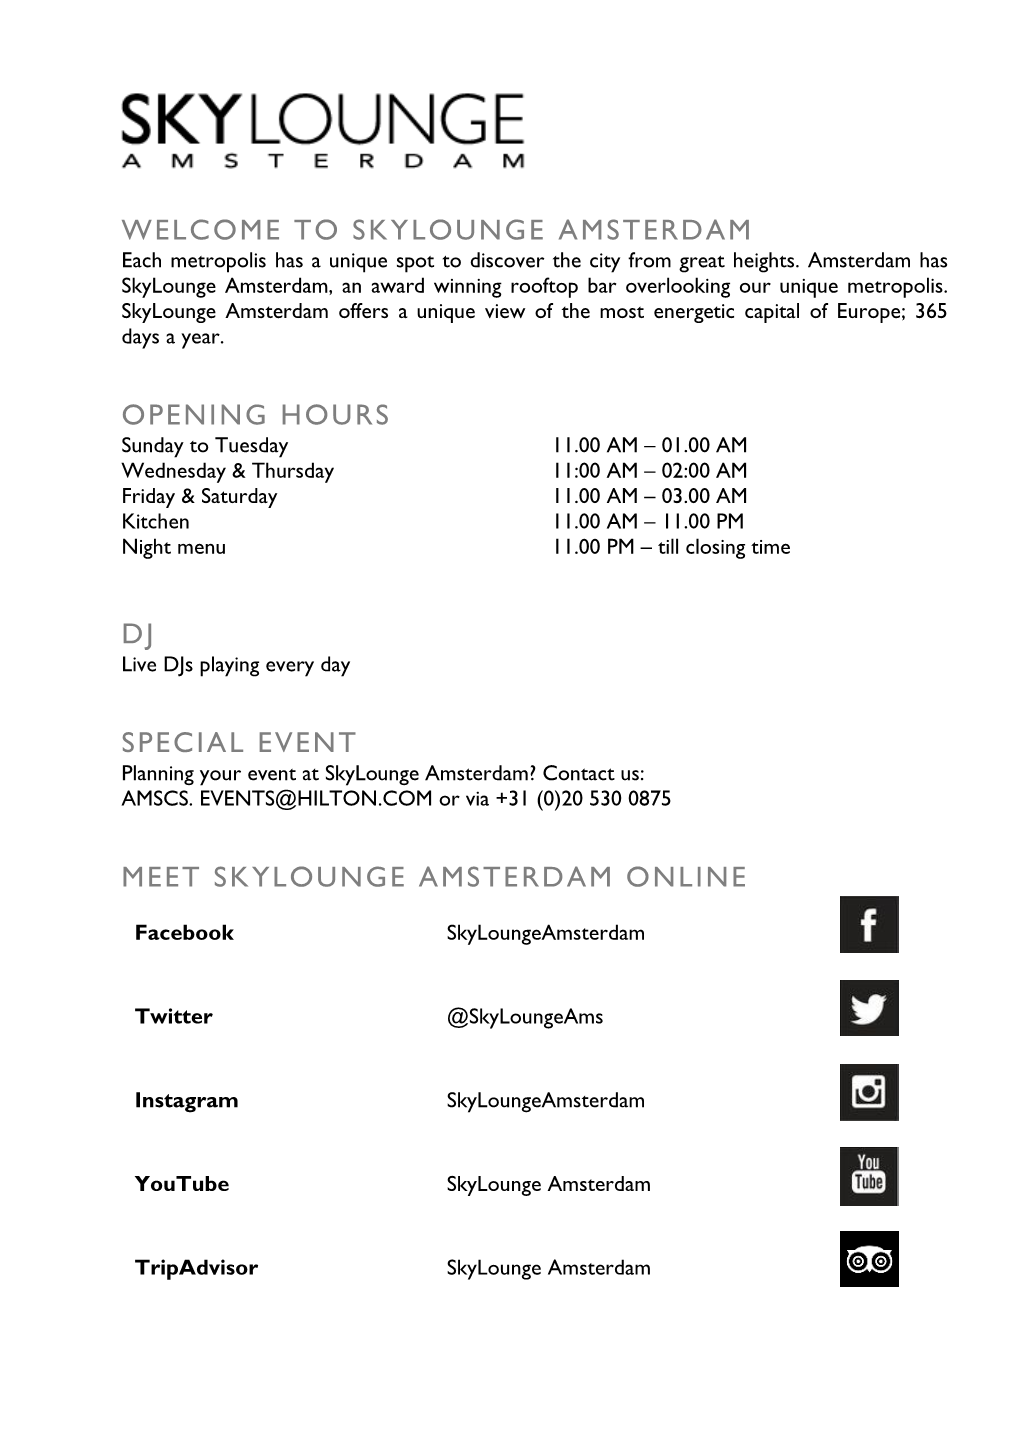 Welcome to Skylounge Amsterdam Opening Hours Dj Special Event Meet Skylounge Amsterdam Online